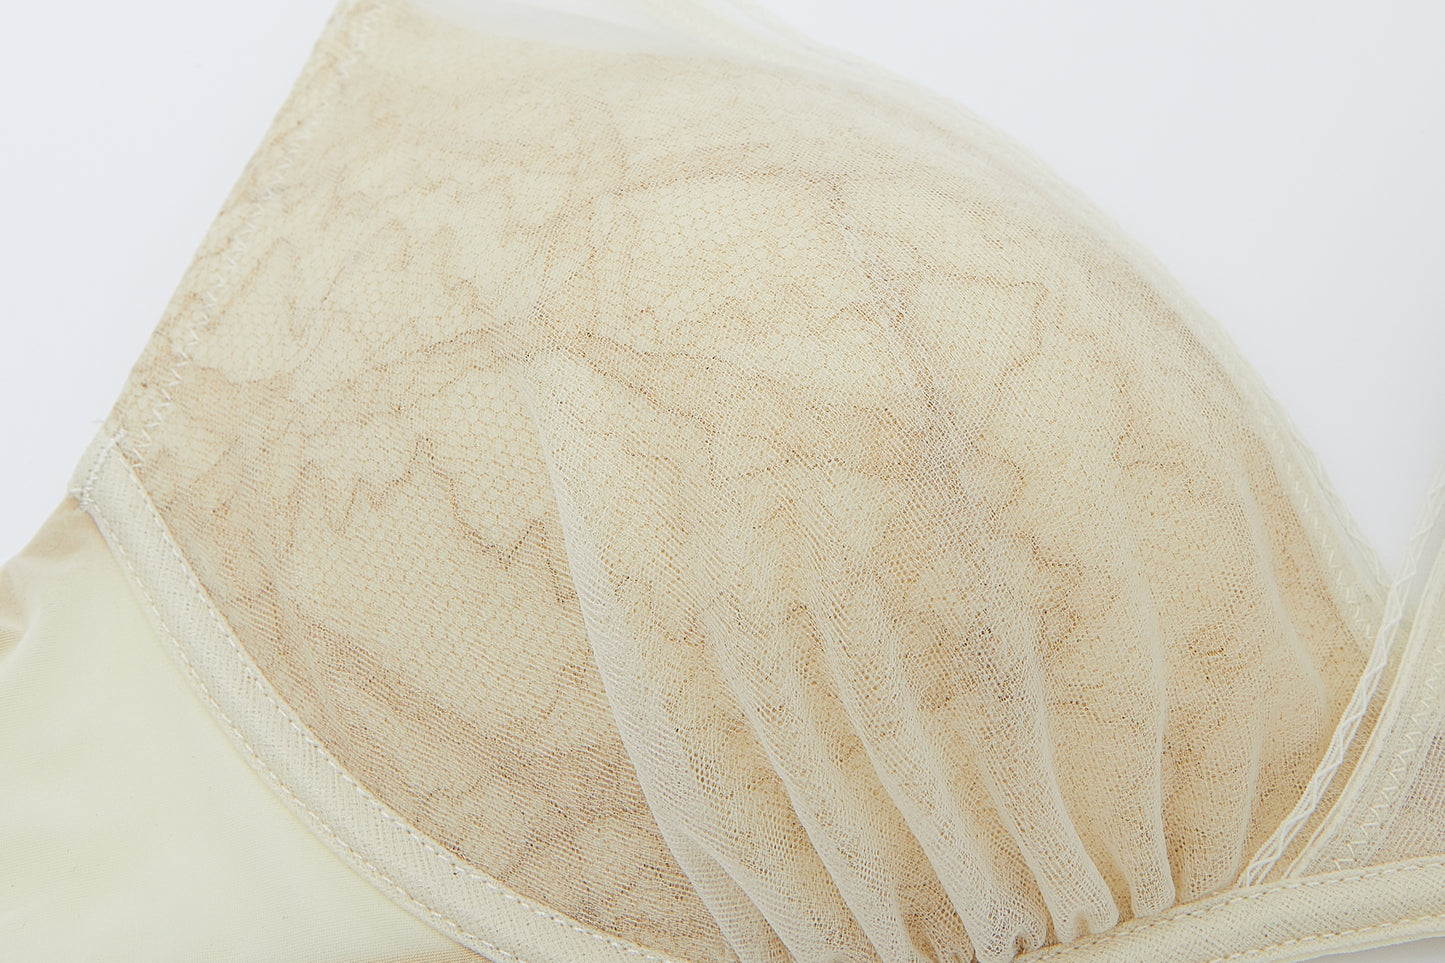 close up of the lace bra